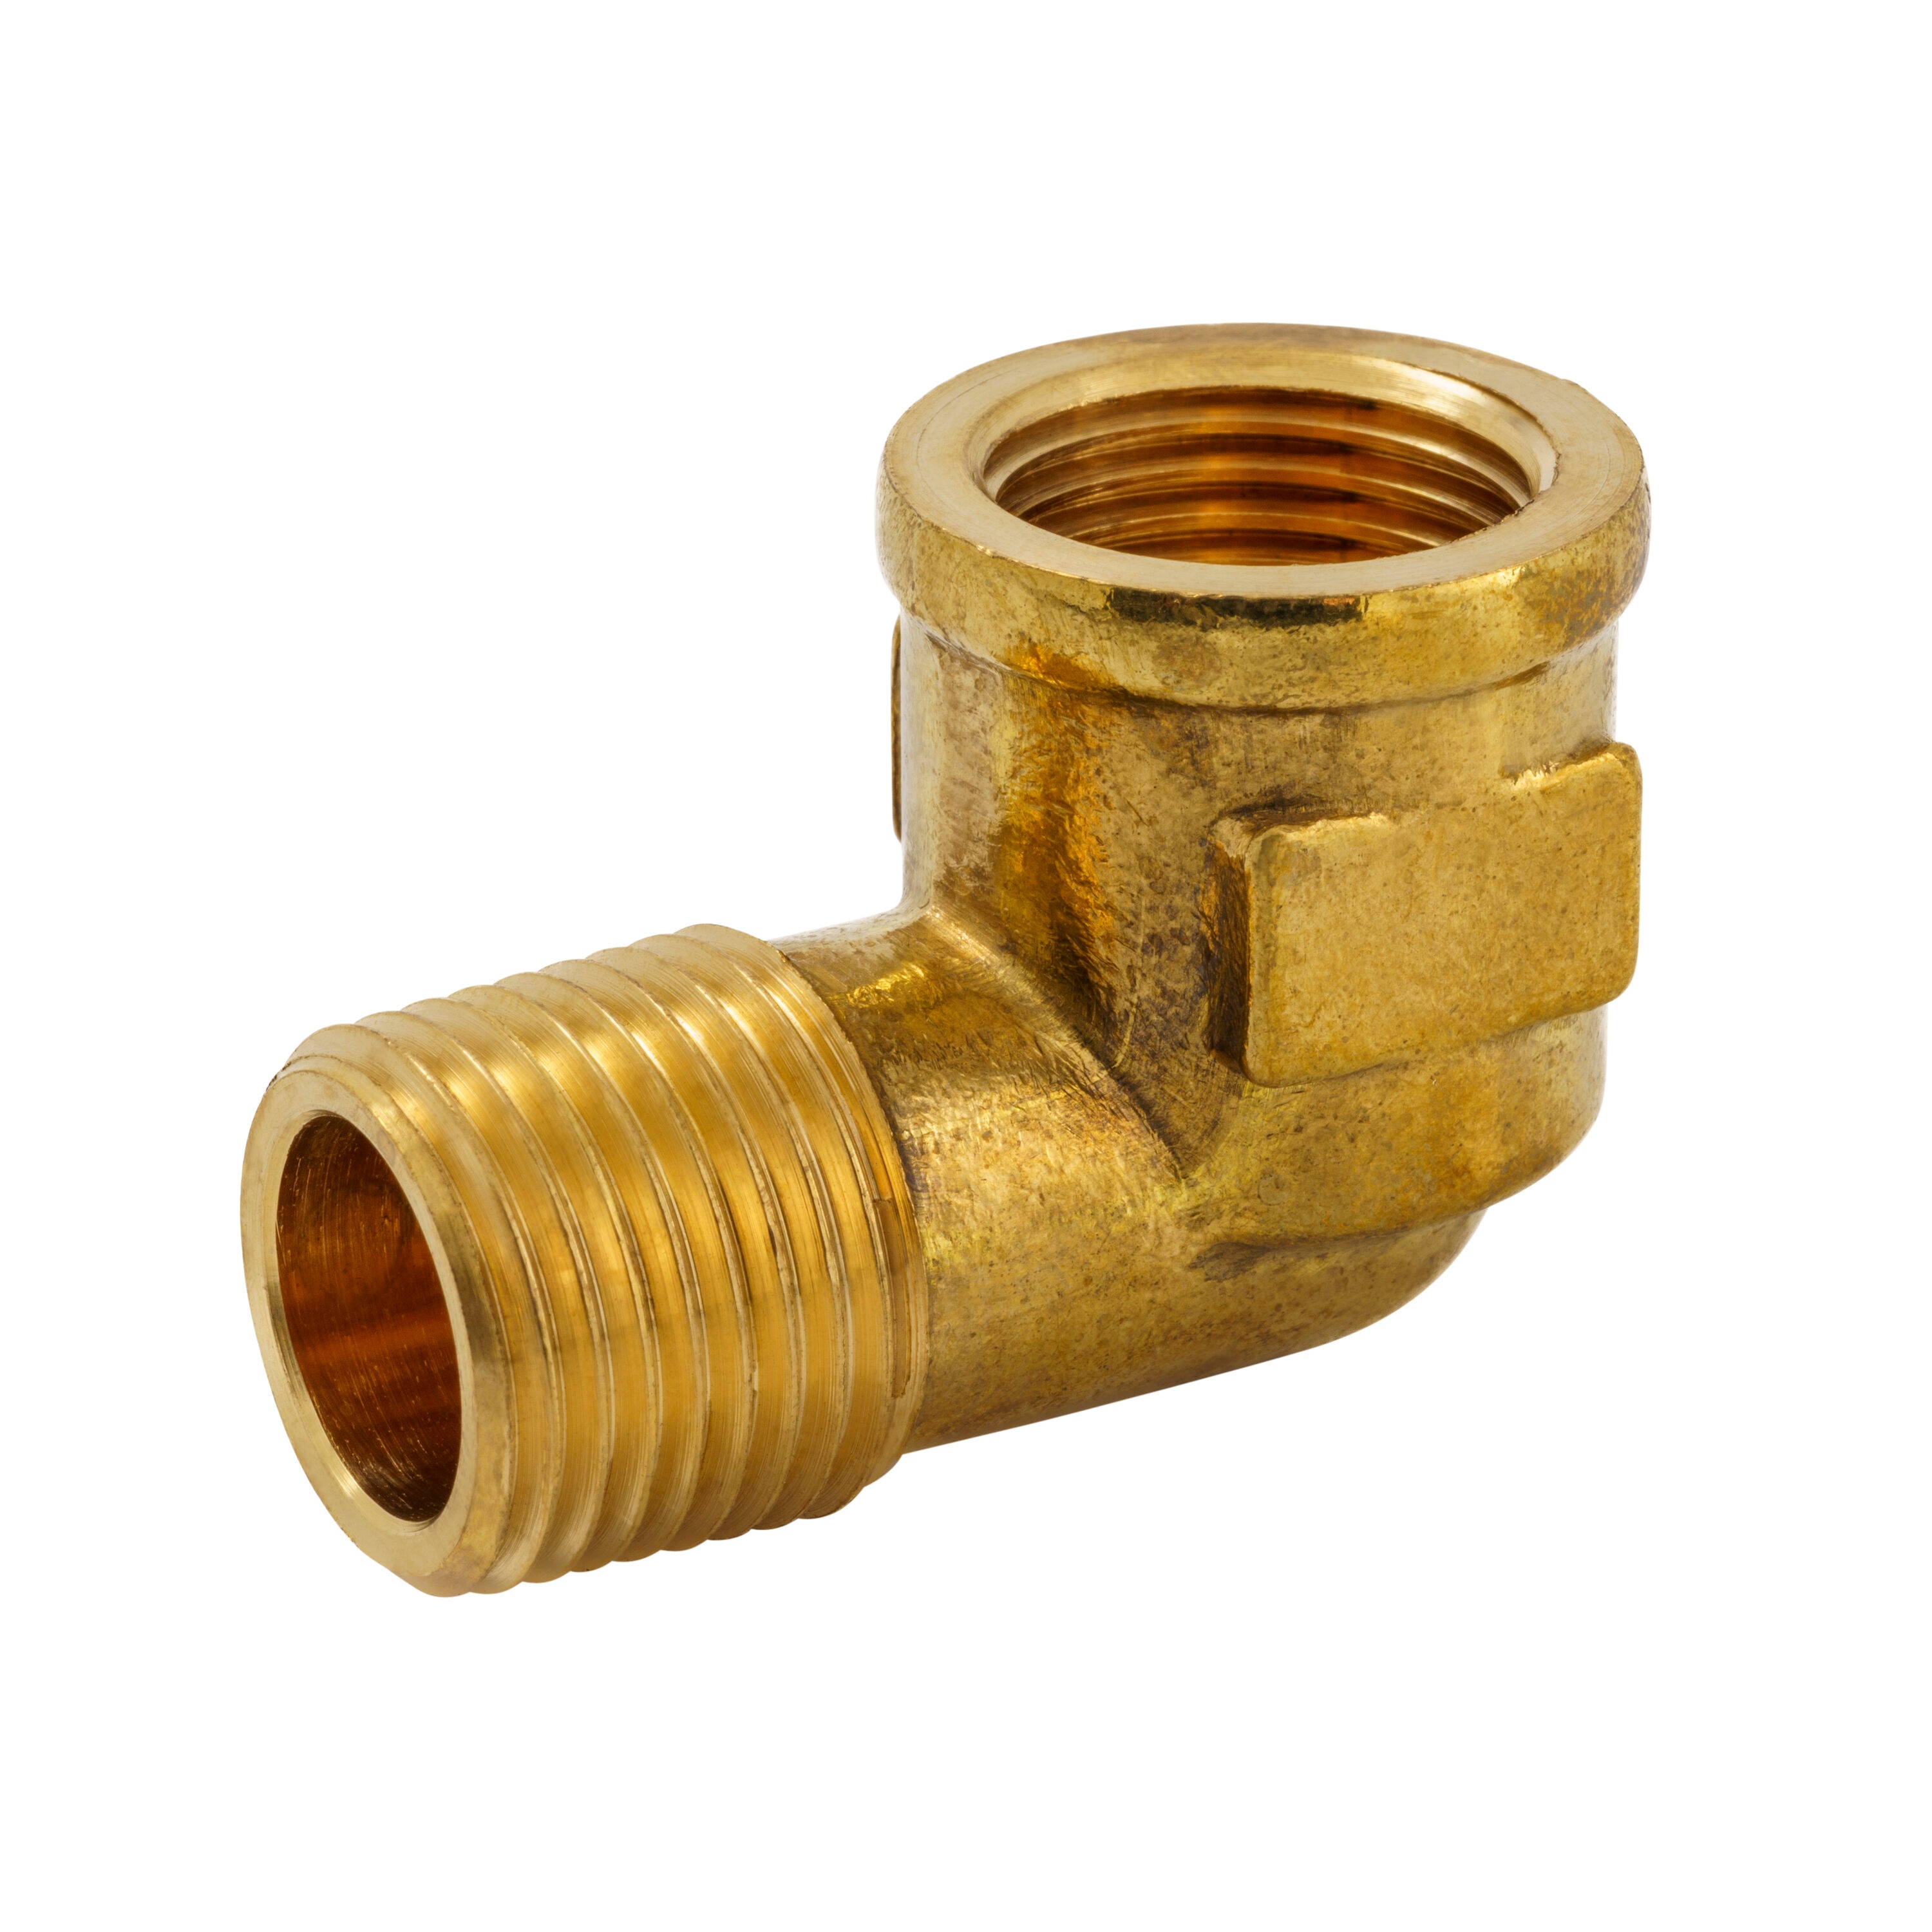 Proline Series 1/4-in x 1/4-in Threaded Street Elbow Fitting